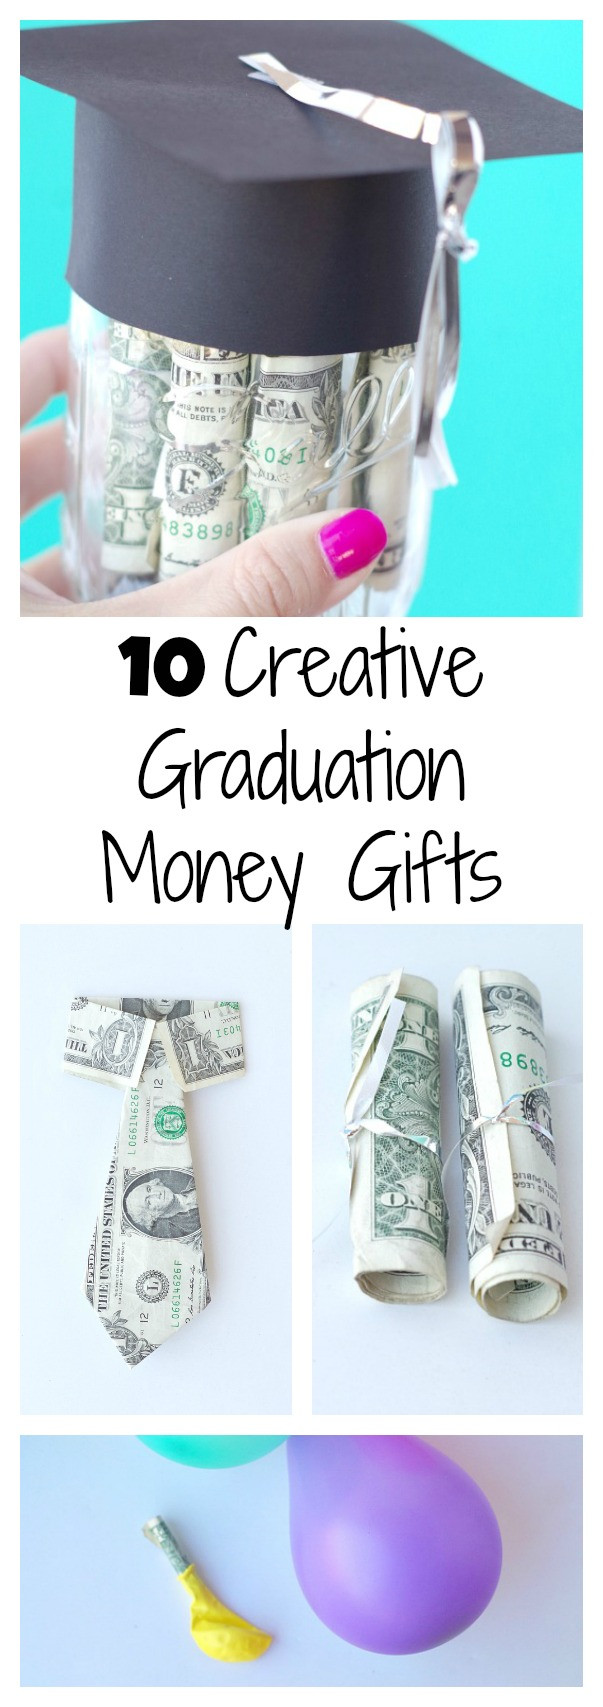 Money Gift Ideas For Graduation
 10 Creative Graduation Money Gifts – Val Event Gal